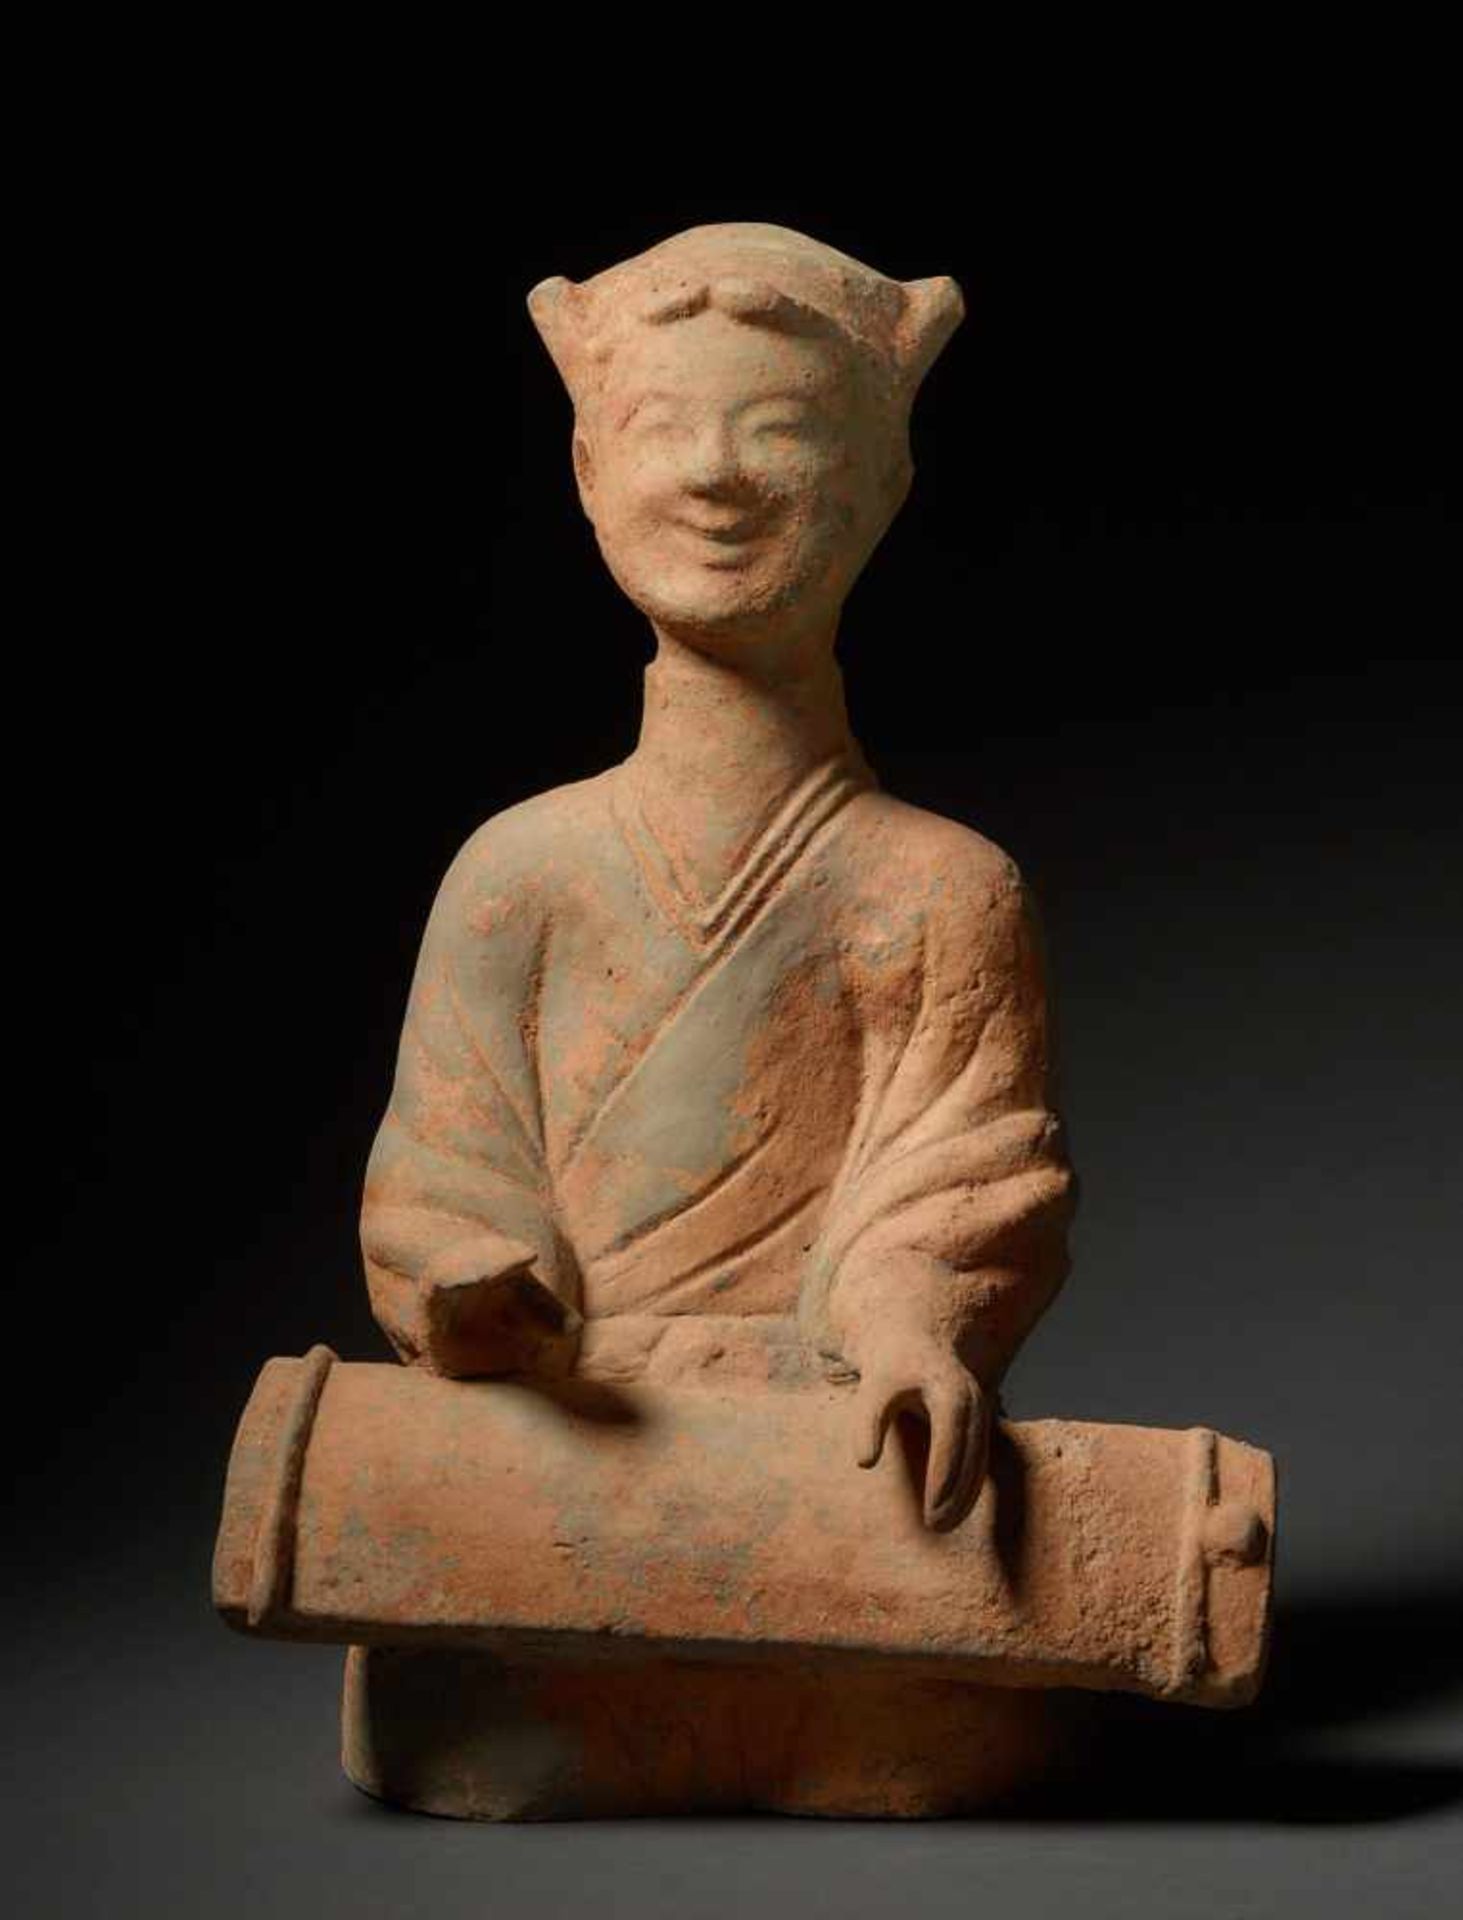 MUSICIAN Terracotta. China, Sichuan, Eastern Han (25 - 220) A girl cowered on the bottom, playing